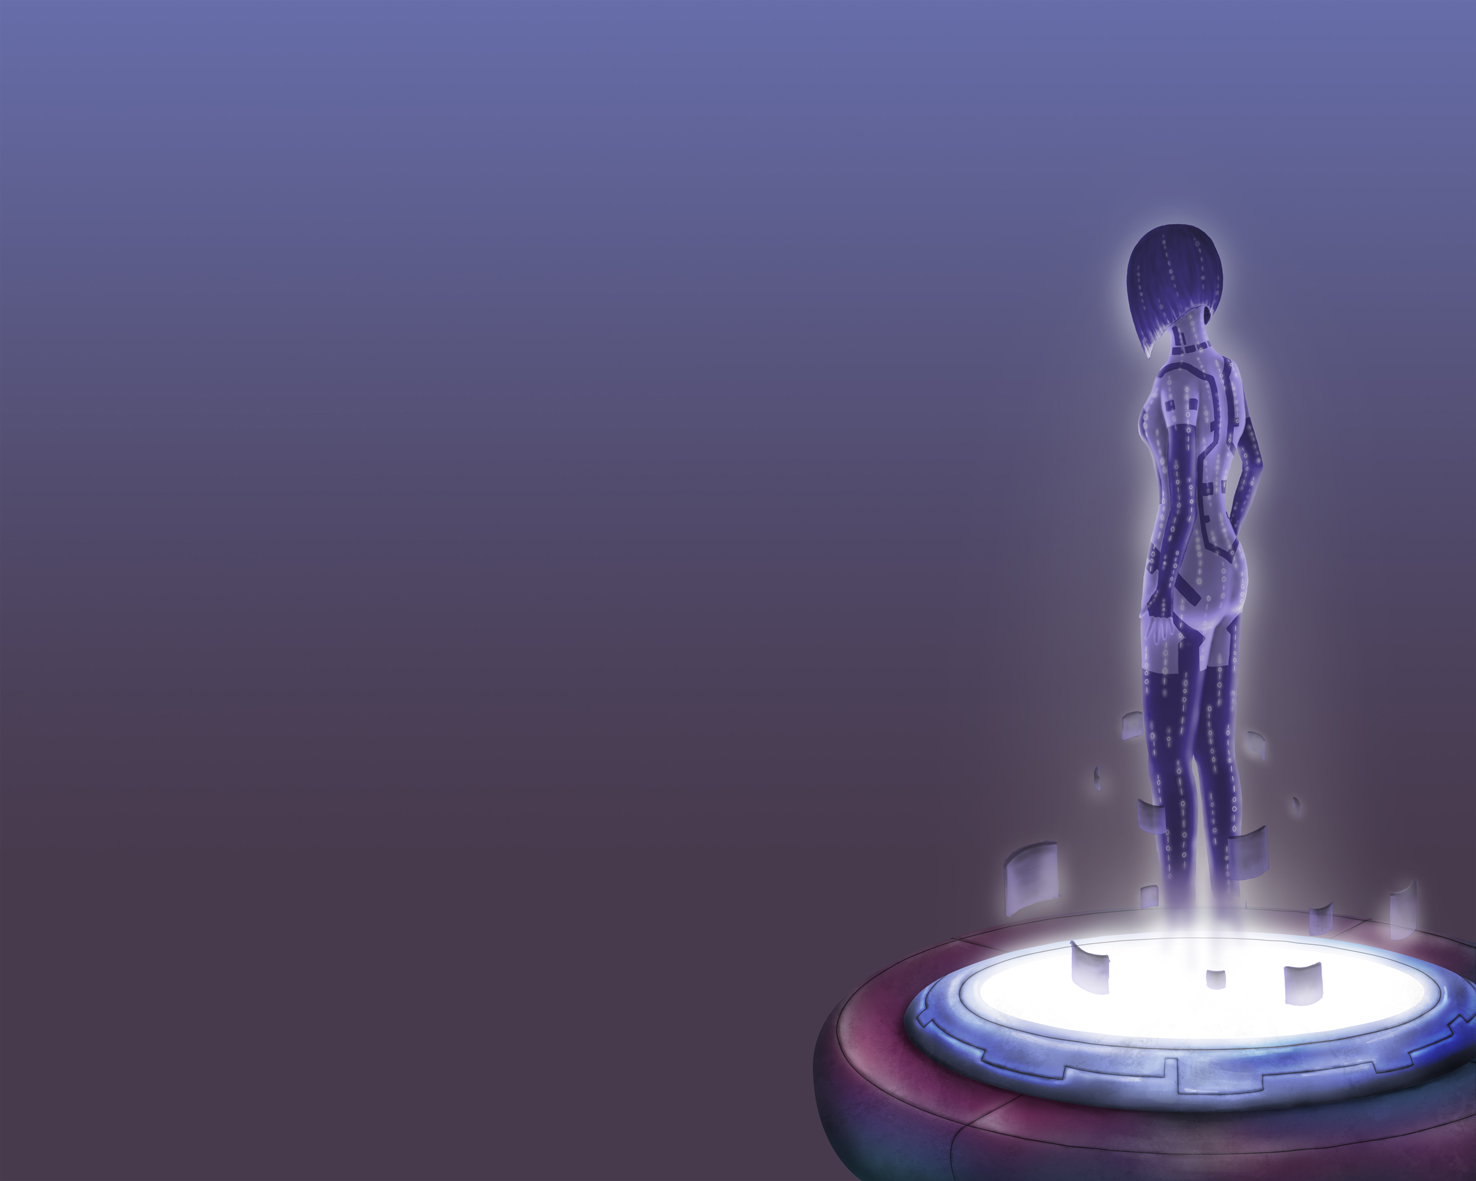 Cortana Wallpaper Collection For